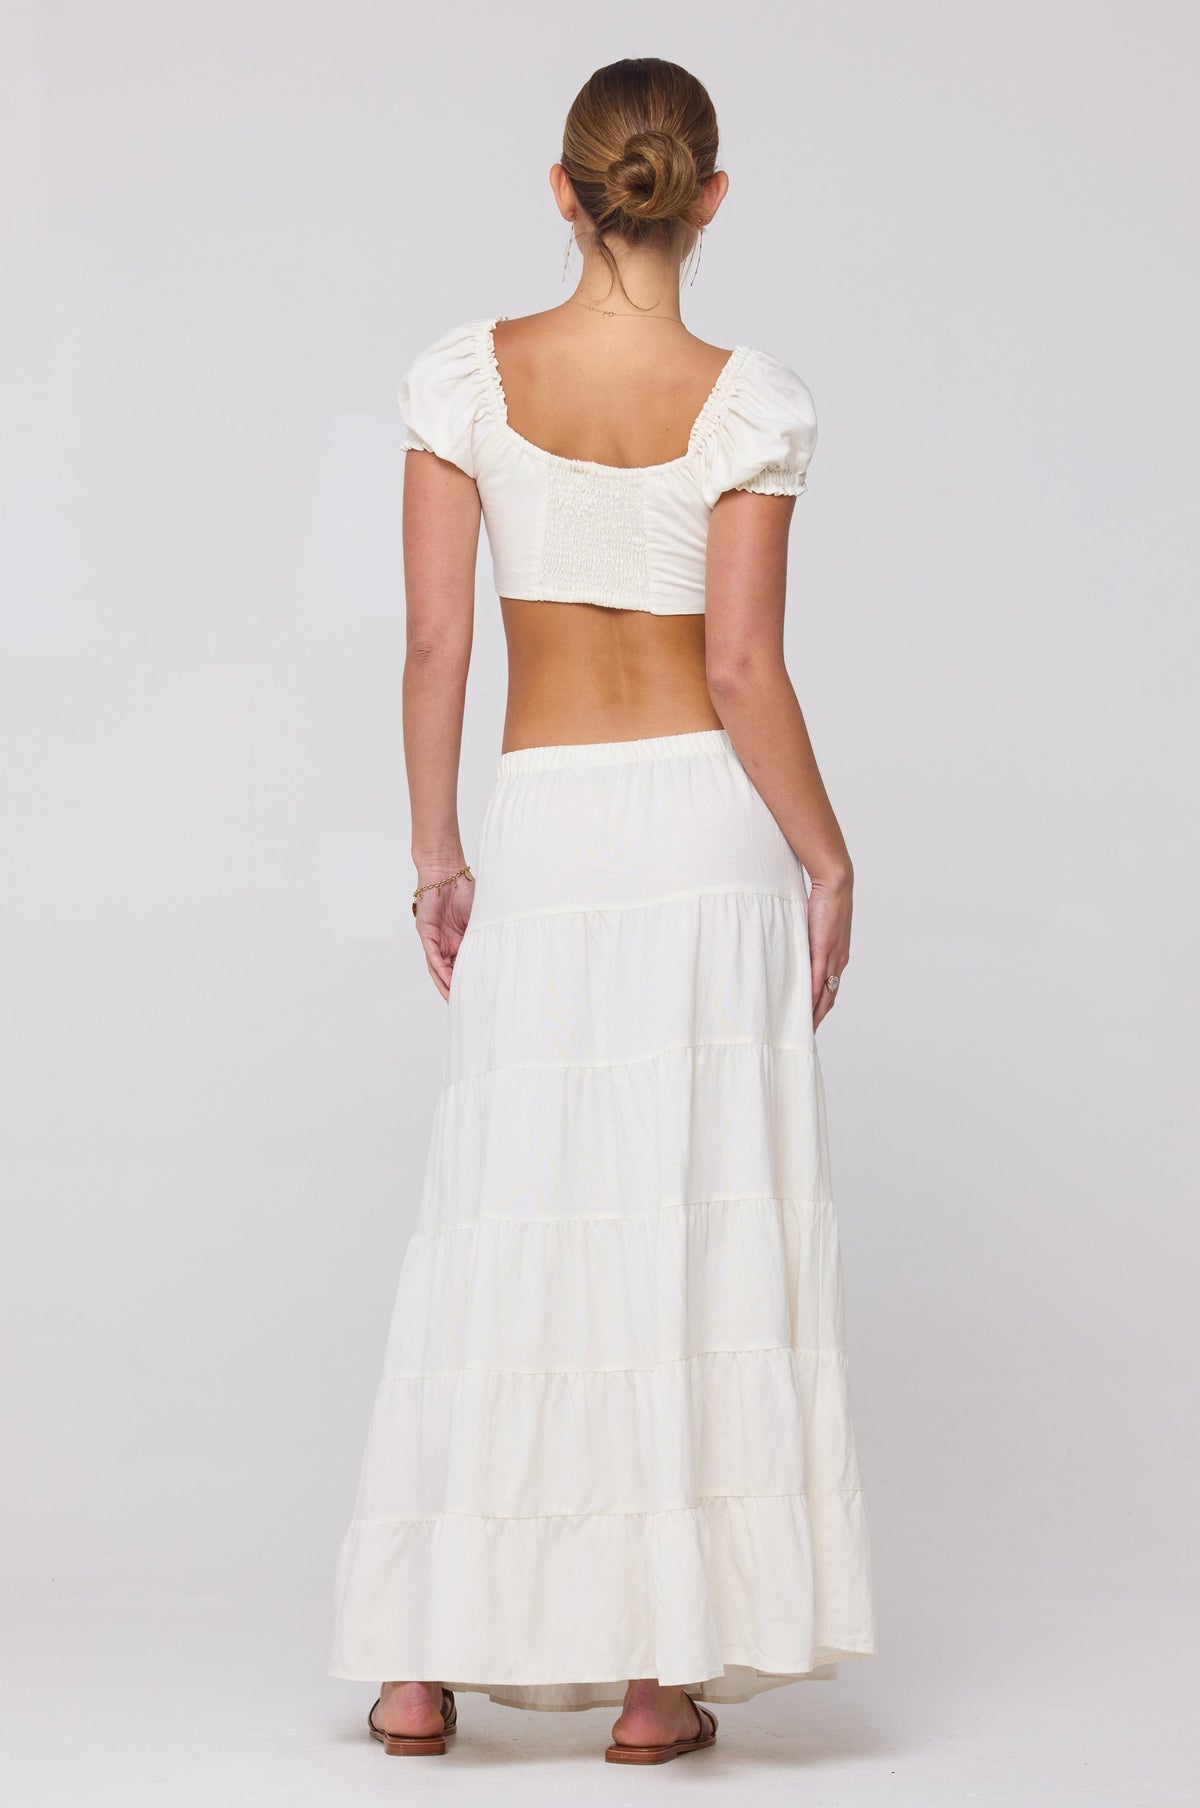 This is an image of Juliana Skirt in White Linen - RESA featuring a model wearing the dress